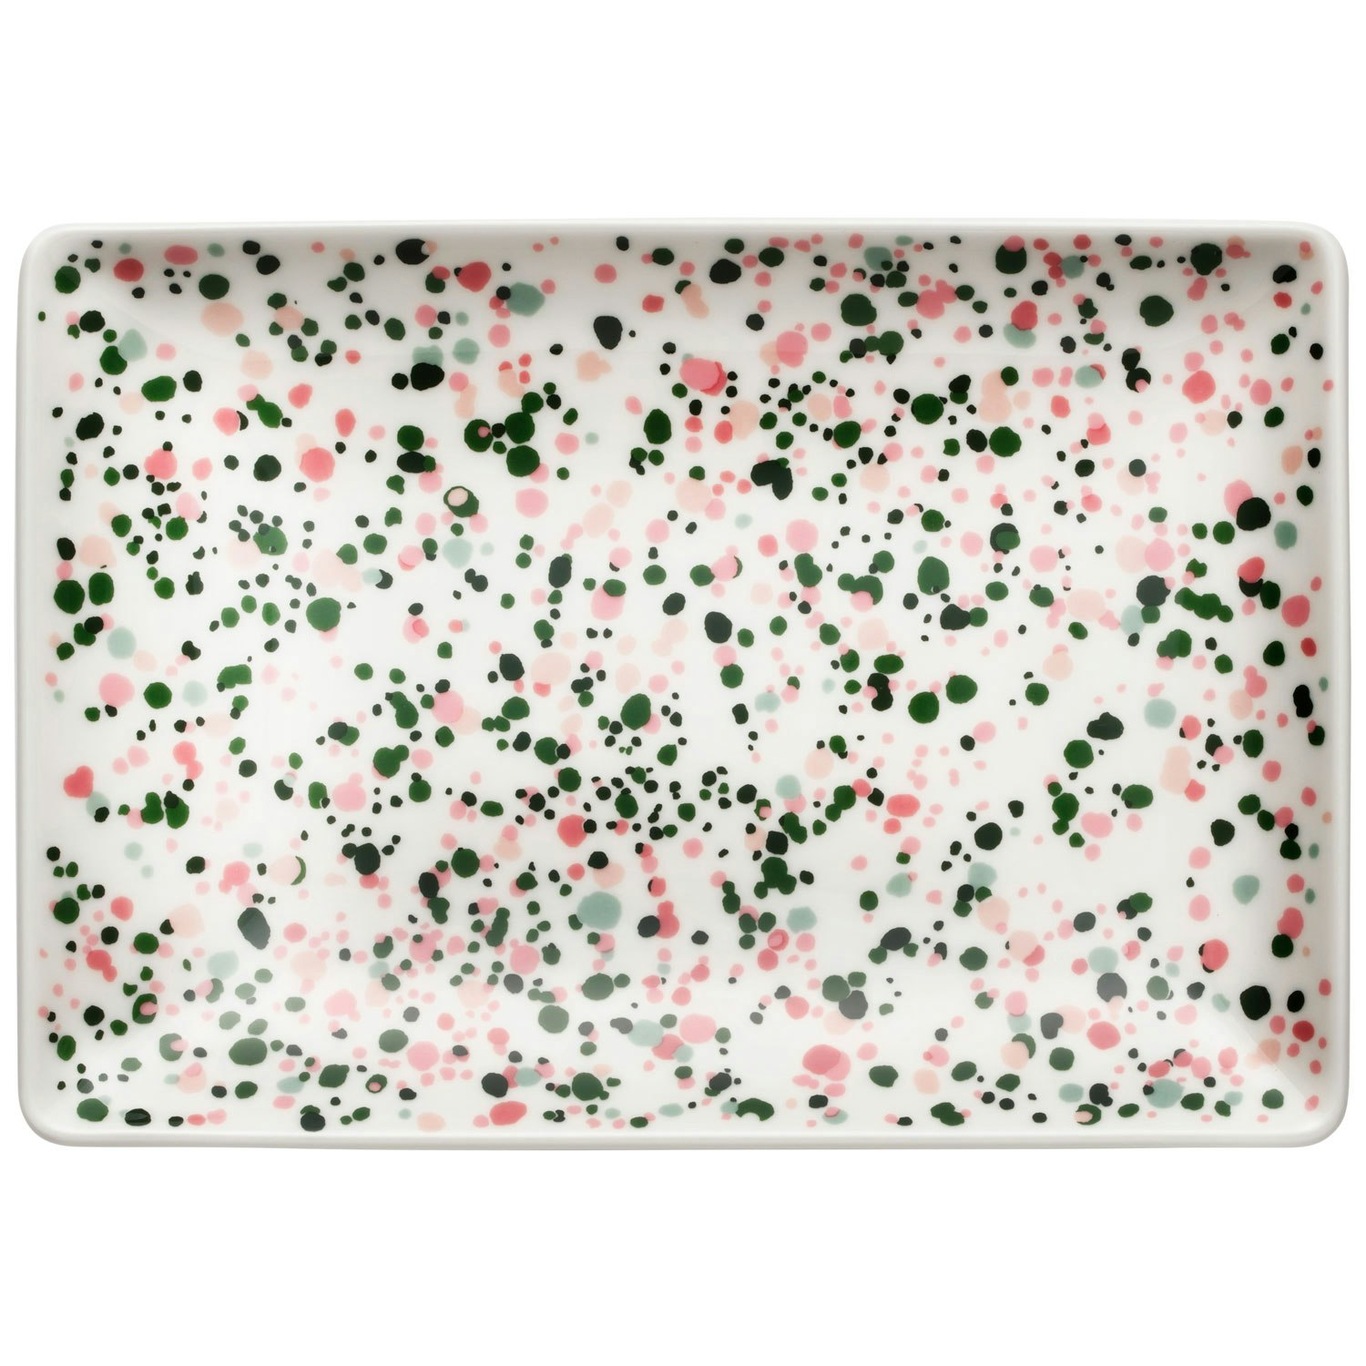 Oiva Toikka Collection Helle Plate Pink / Green, A5 15x21 cm